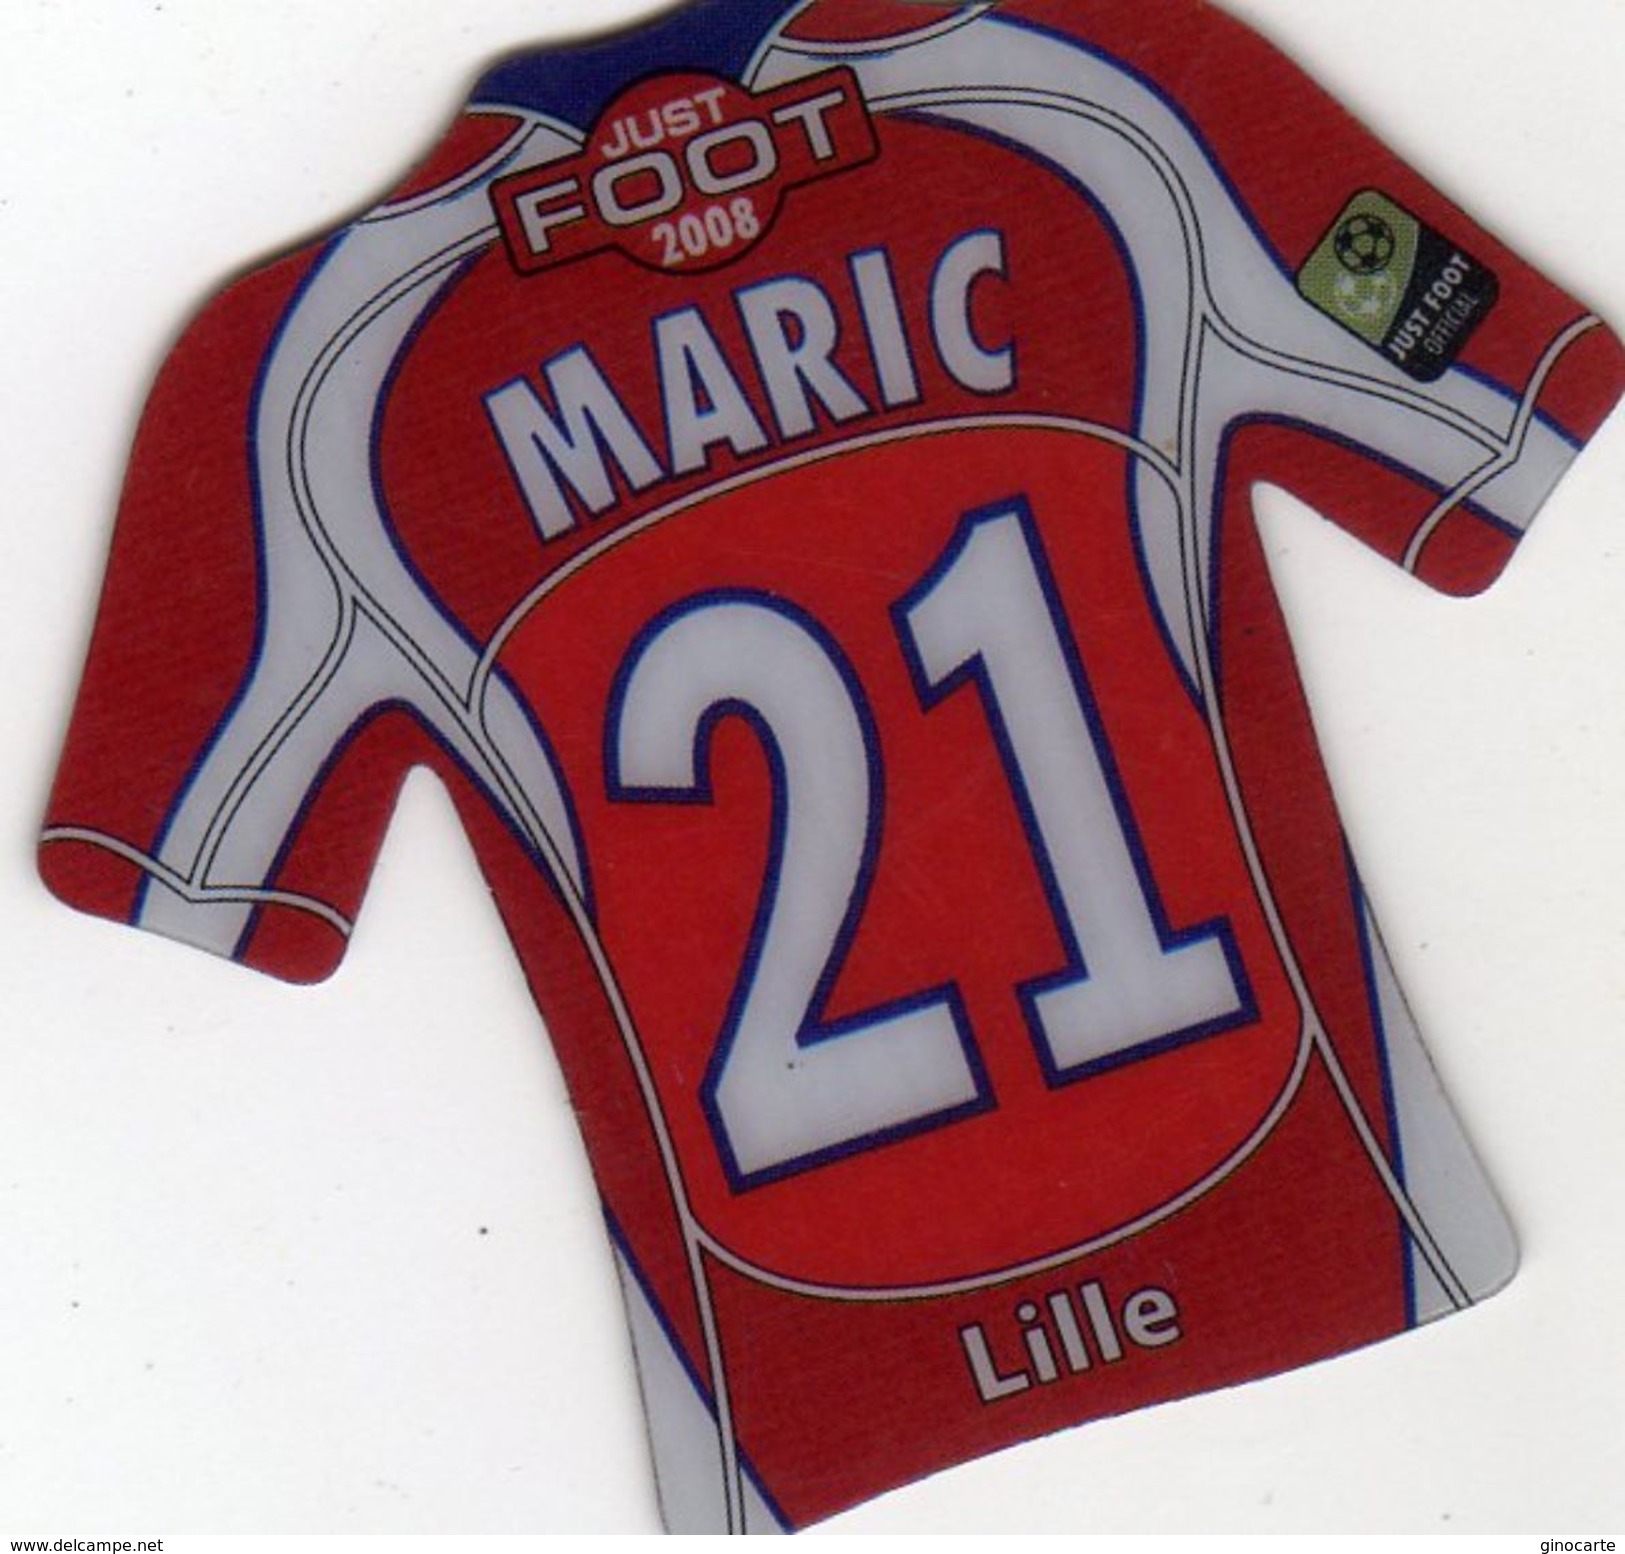 Magnet Magnets Maillot De Football Pitch Lille Maric 2008 - Sport